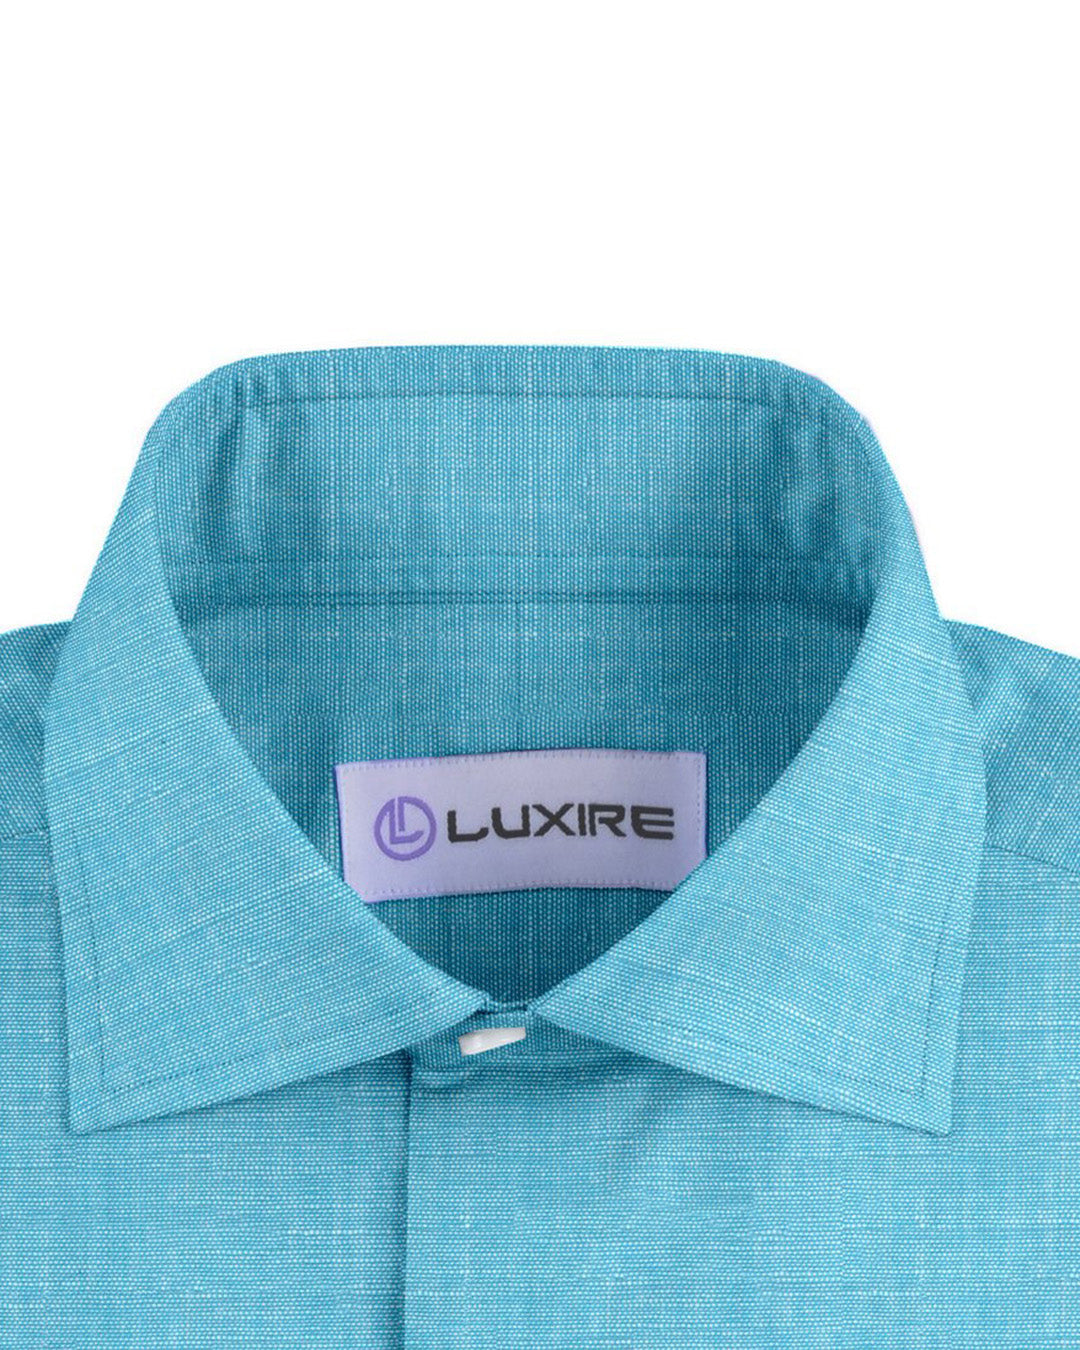 Collar of the custom linen shirt for men in sky blue by Luxire Clothing